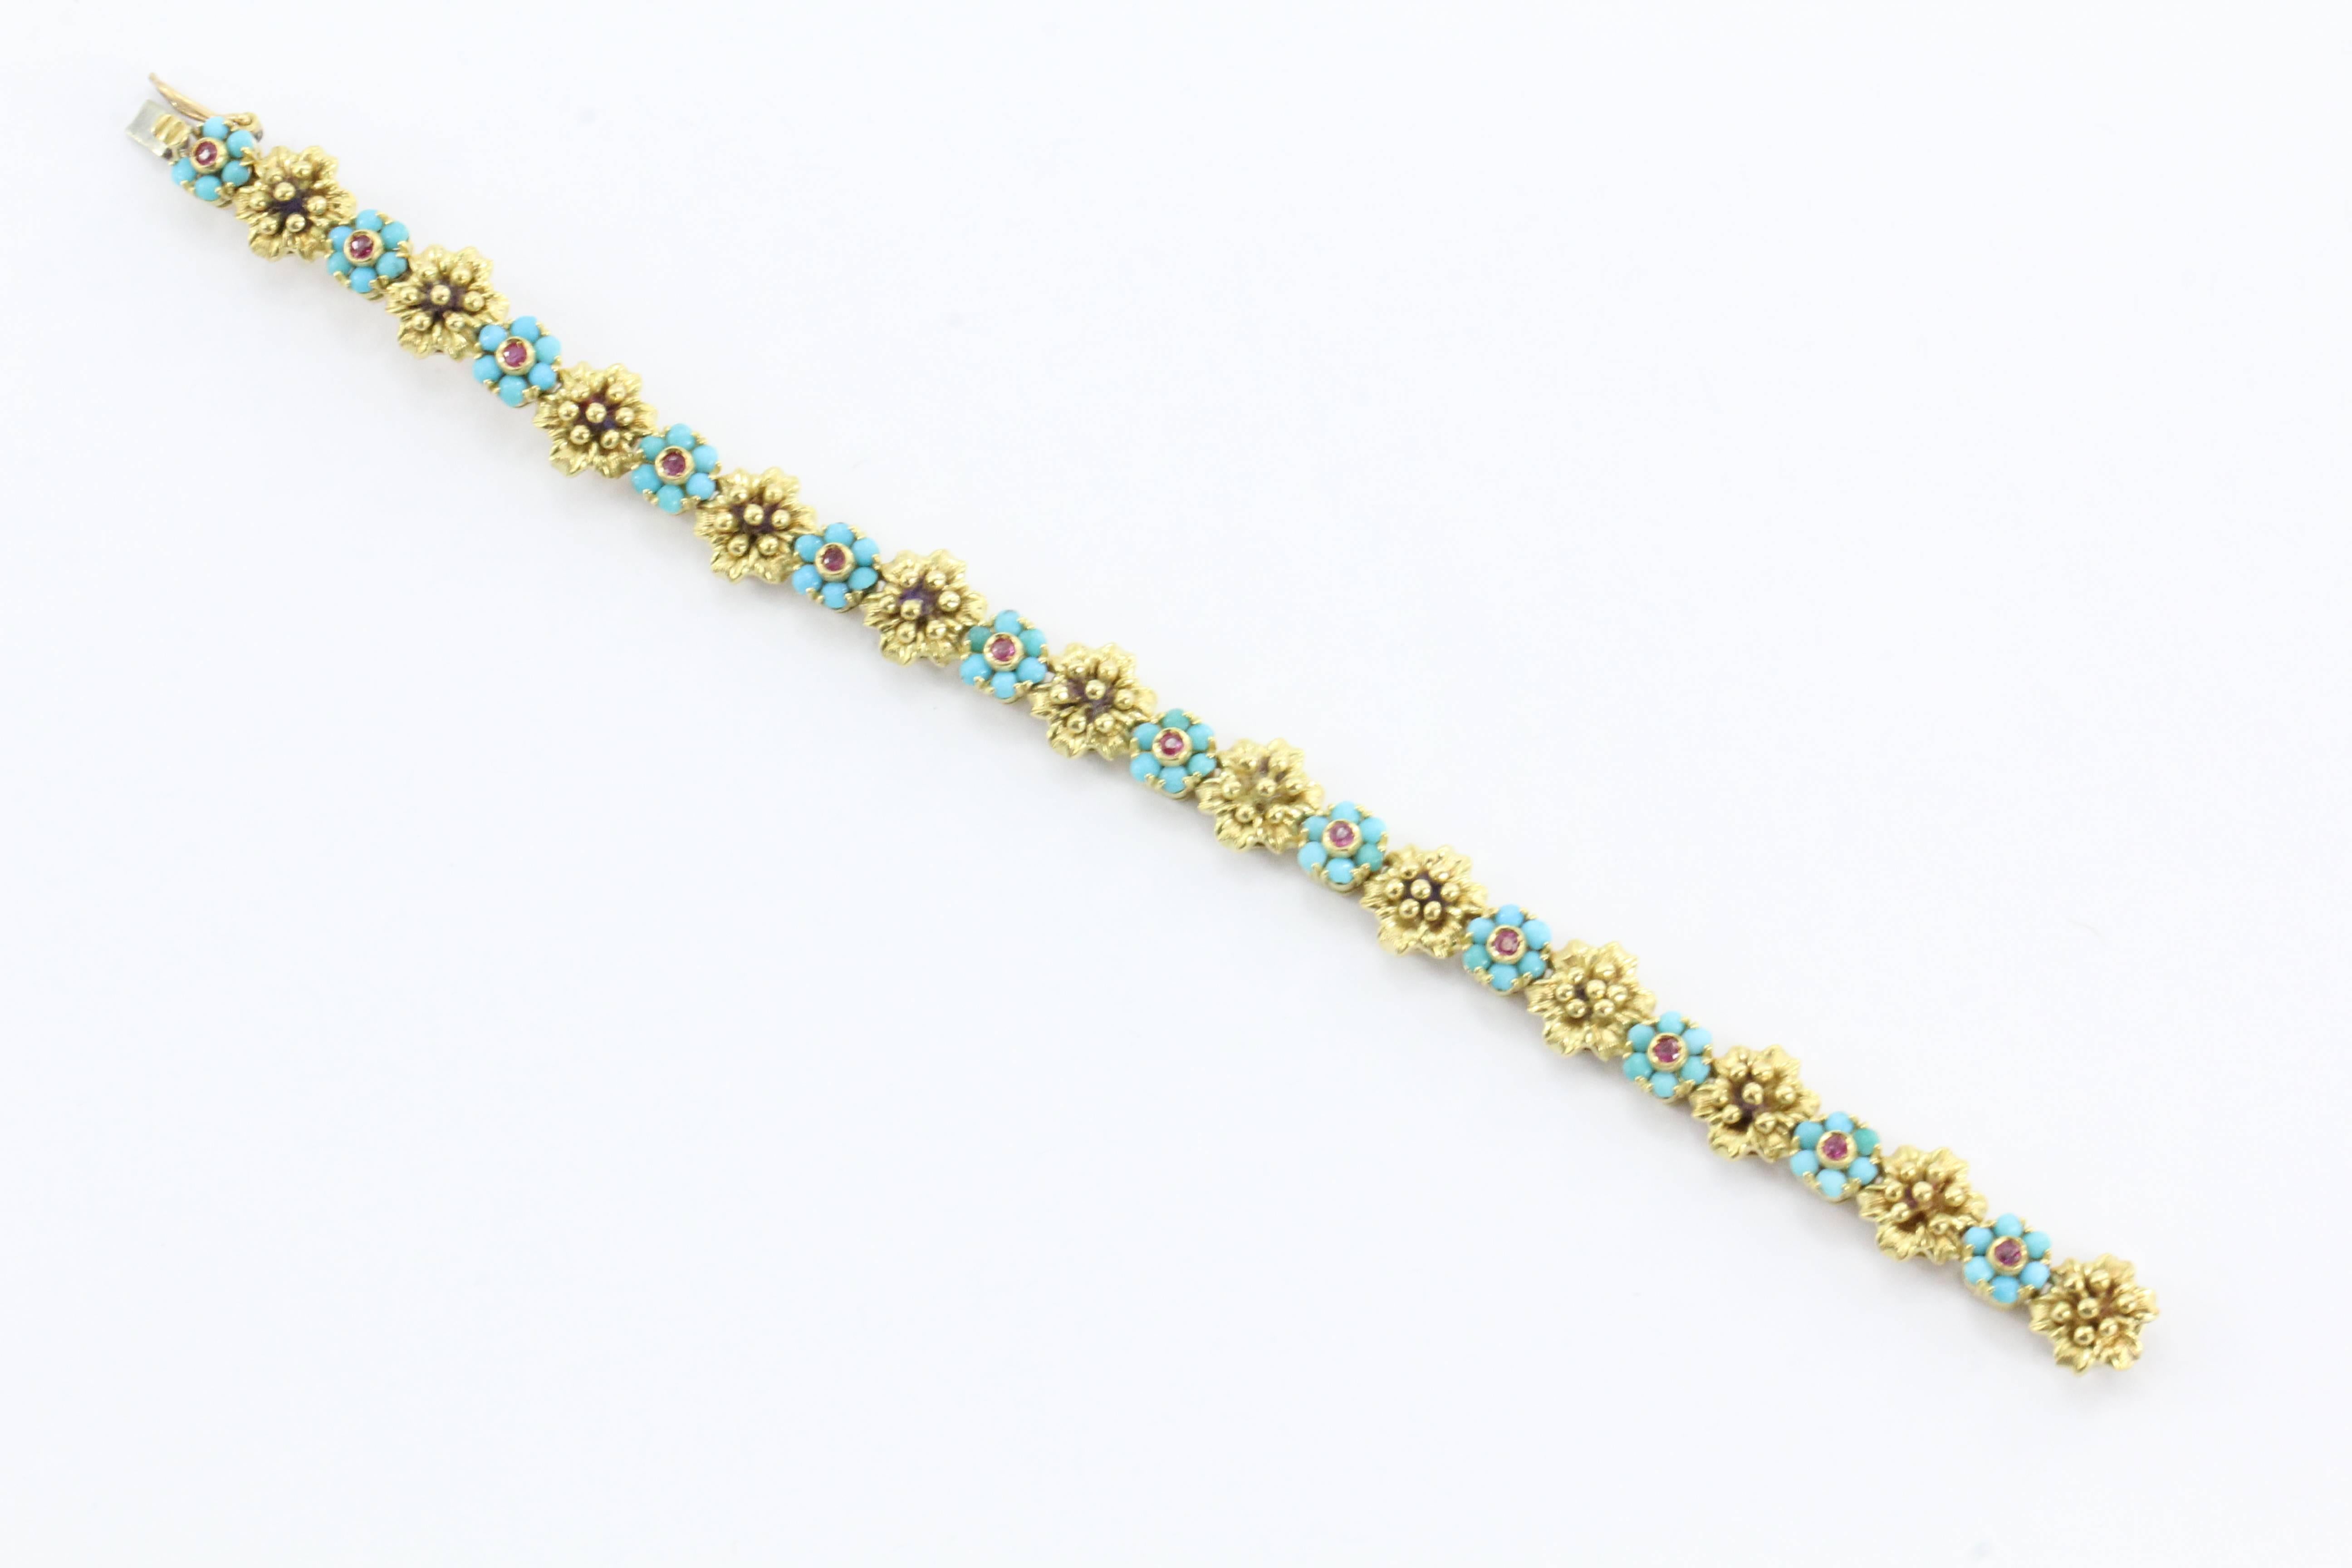 Vintage Custom handmade designer 18k yellow gold hinged link bracelet with genuine untreated Persian high gloss turquoise with a floral motif and genuine non heated rubies. Exquisite condition, no repairs or defects.

 A stunning piece guaranteed